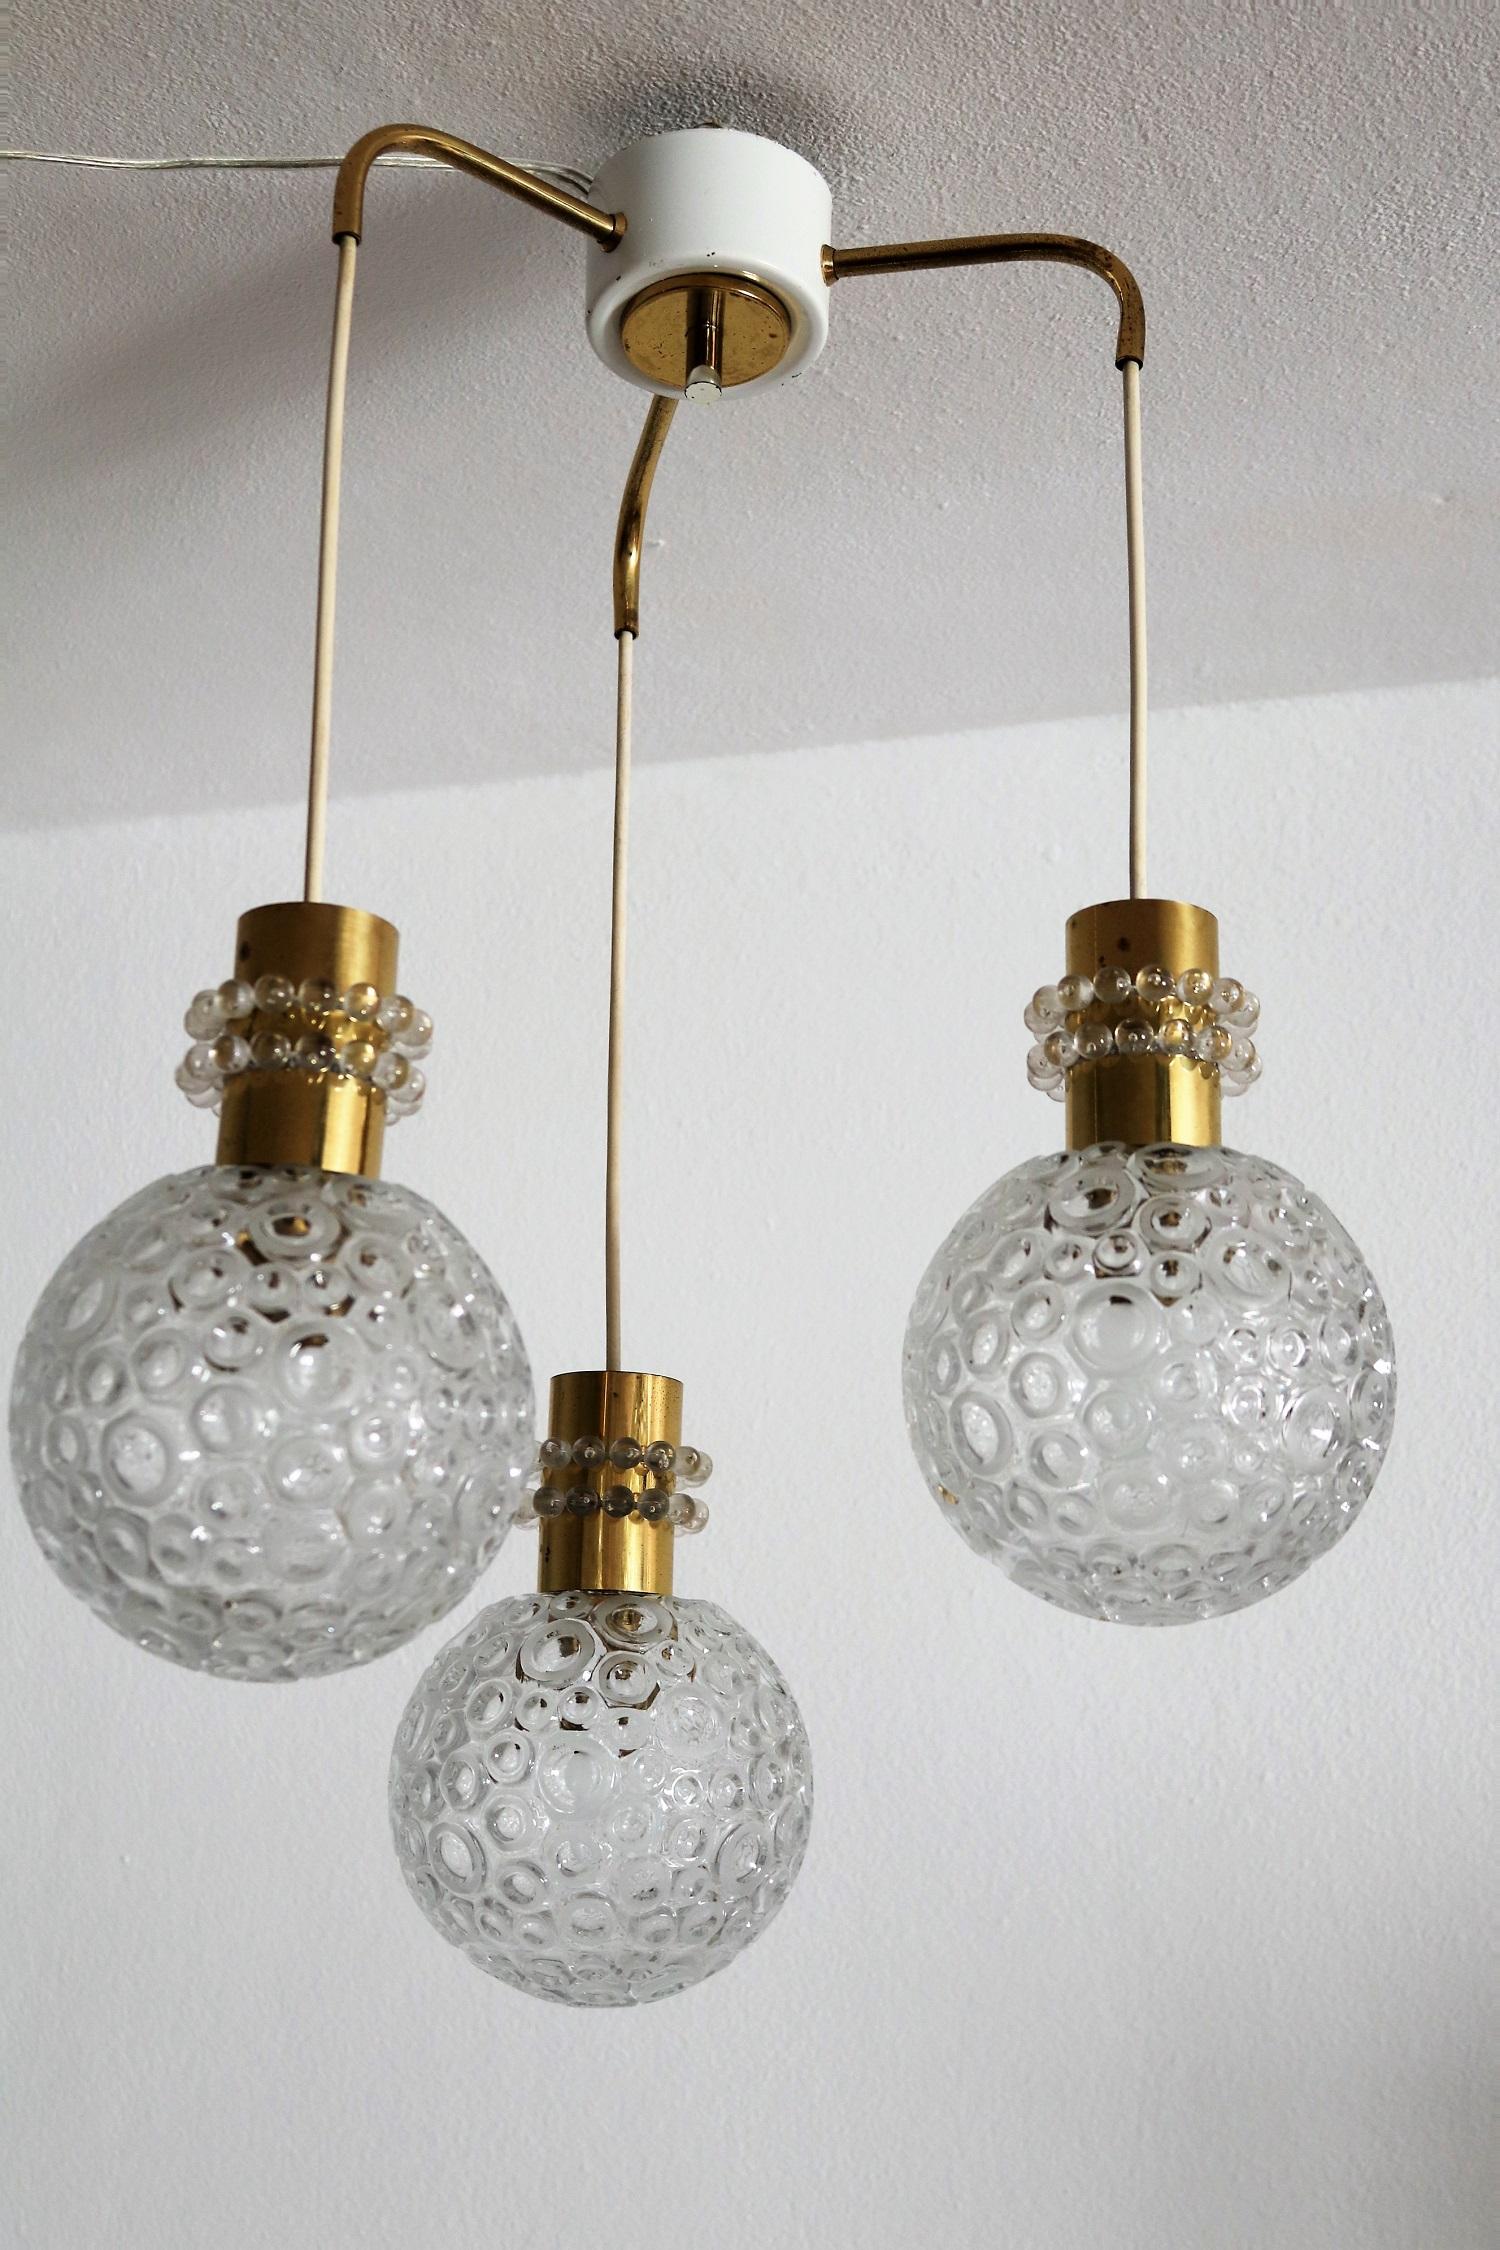 Midcentury Cascade Ceiling Lamp with 3 Glass Pendents in Emil Stejnar Style For Sale 5